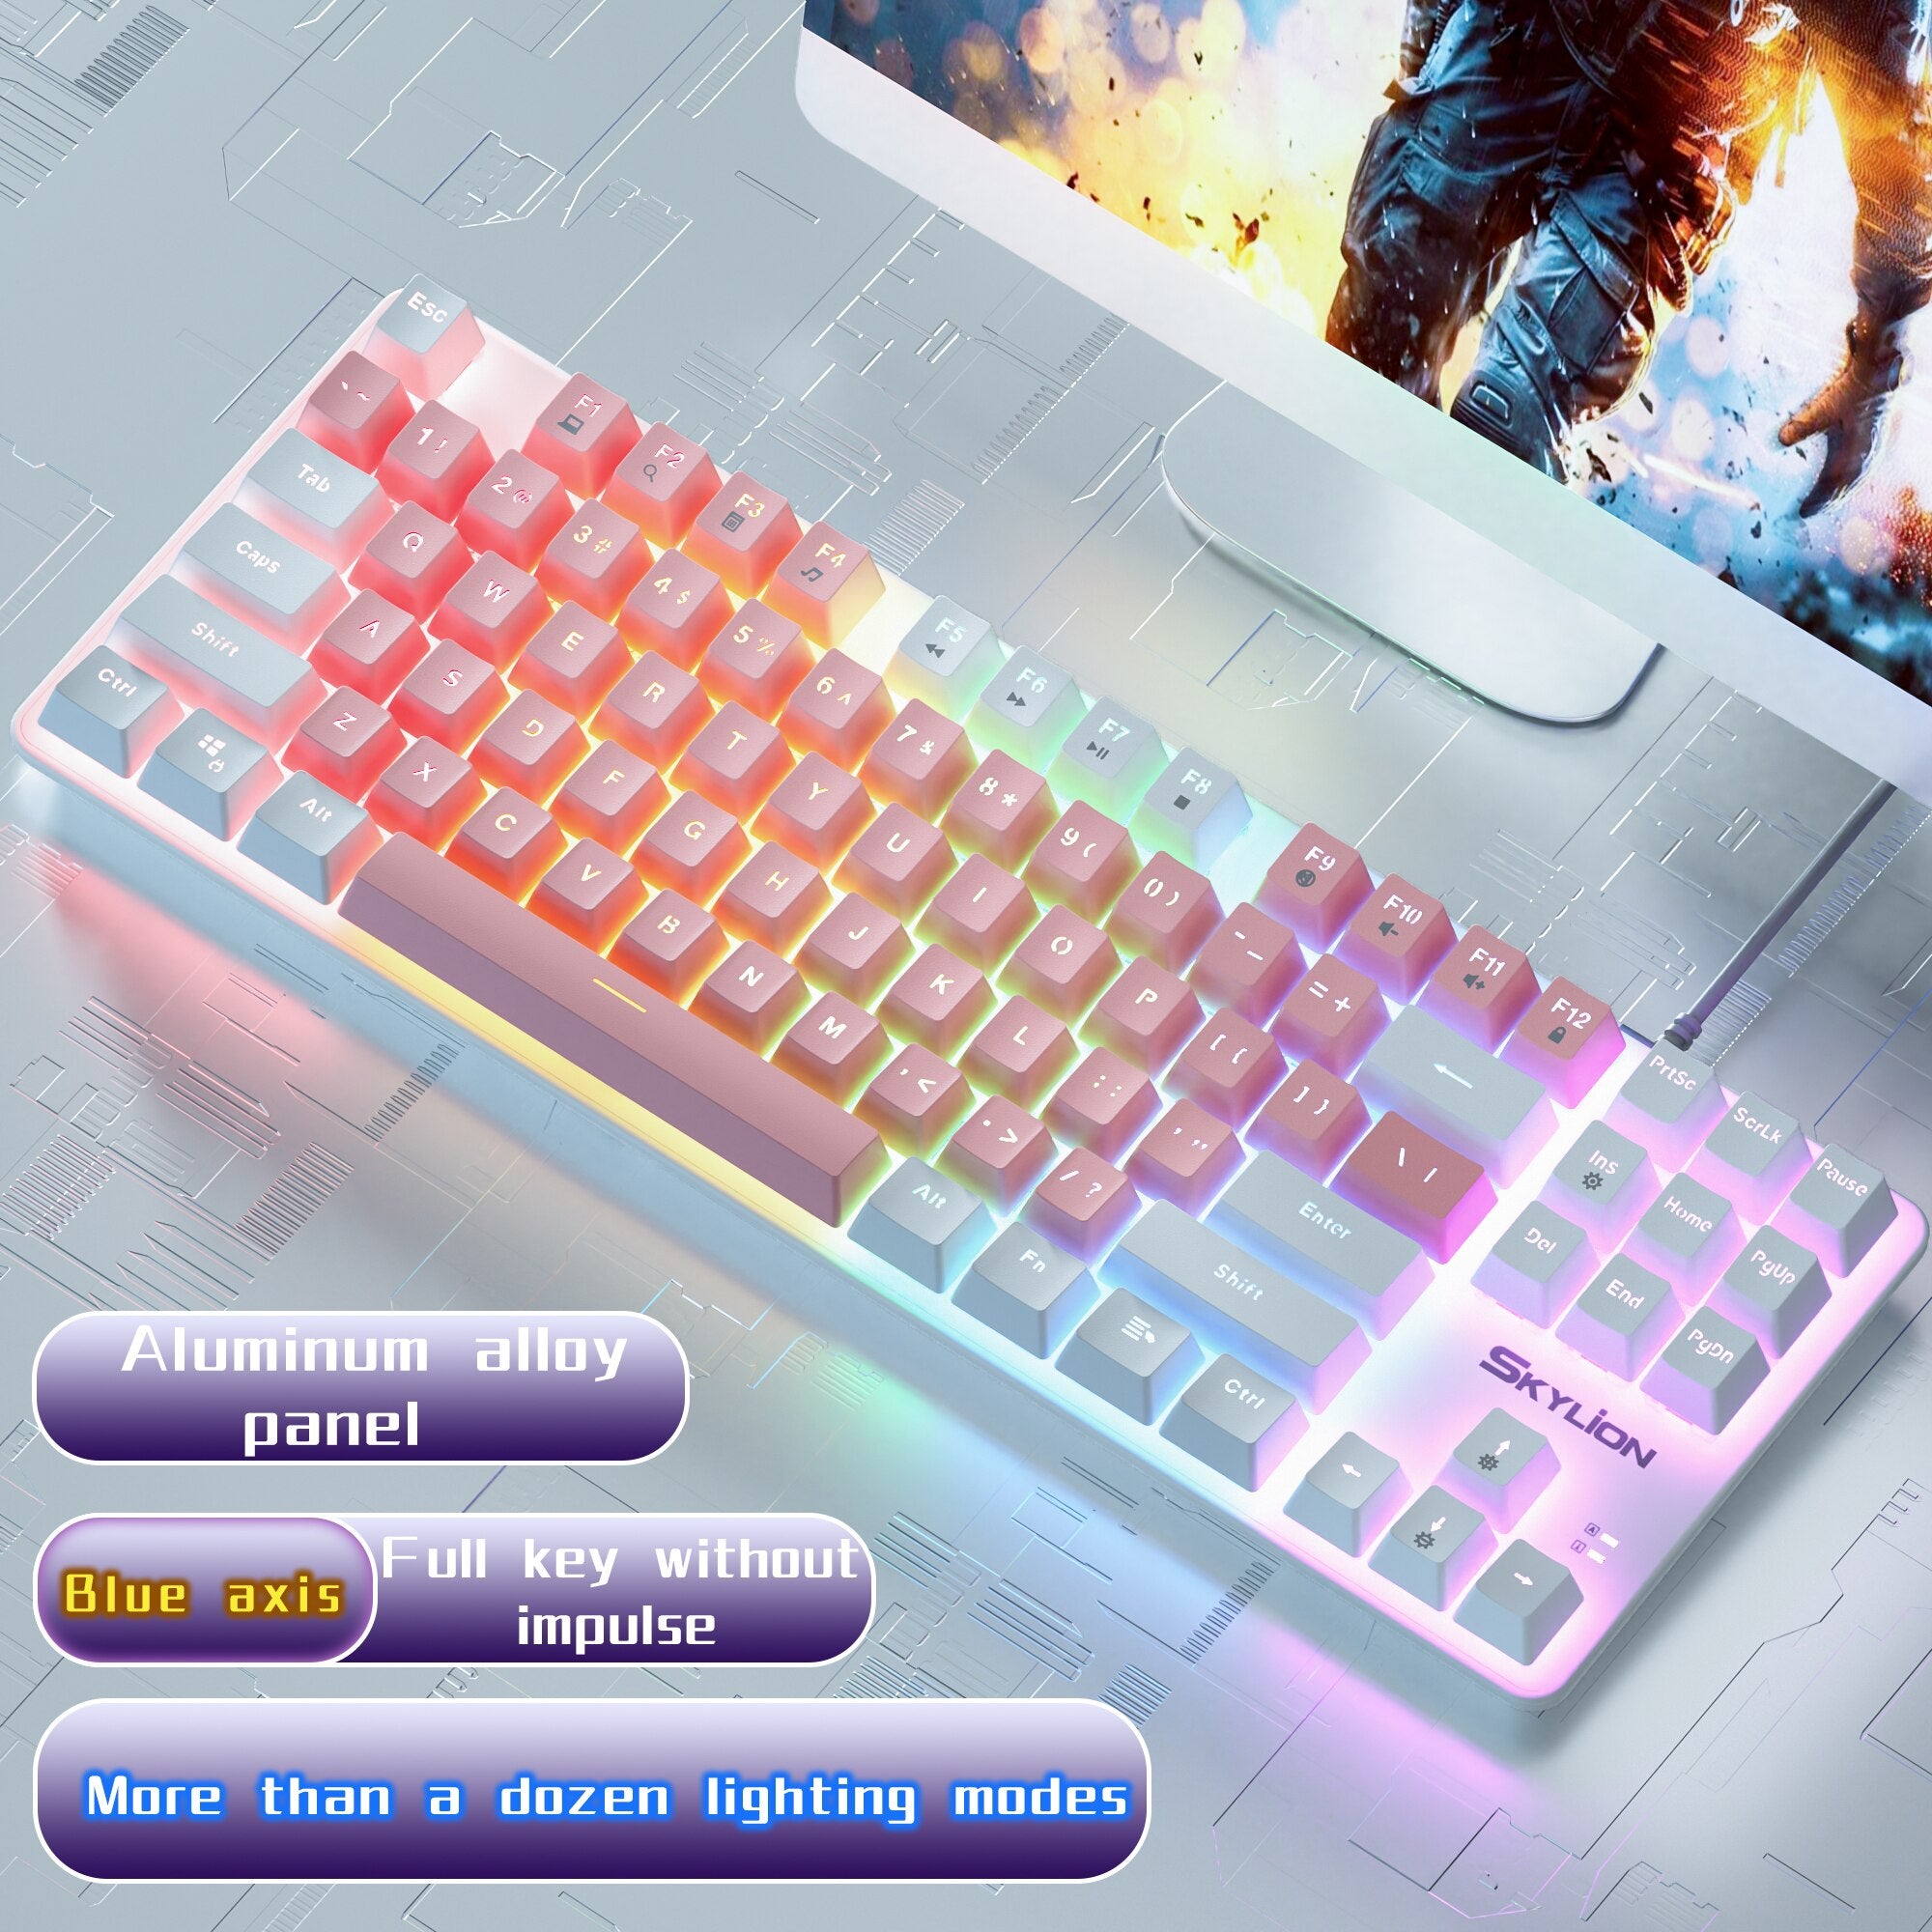 SKYLION H87 Wired Mechanical Keyboard 10 Kinds of Colorful Lighting Gaming and Office For Microsoft Windows and Apple IOS System